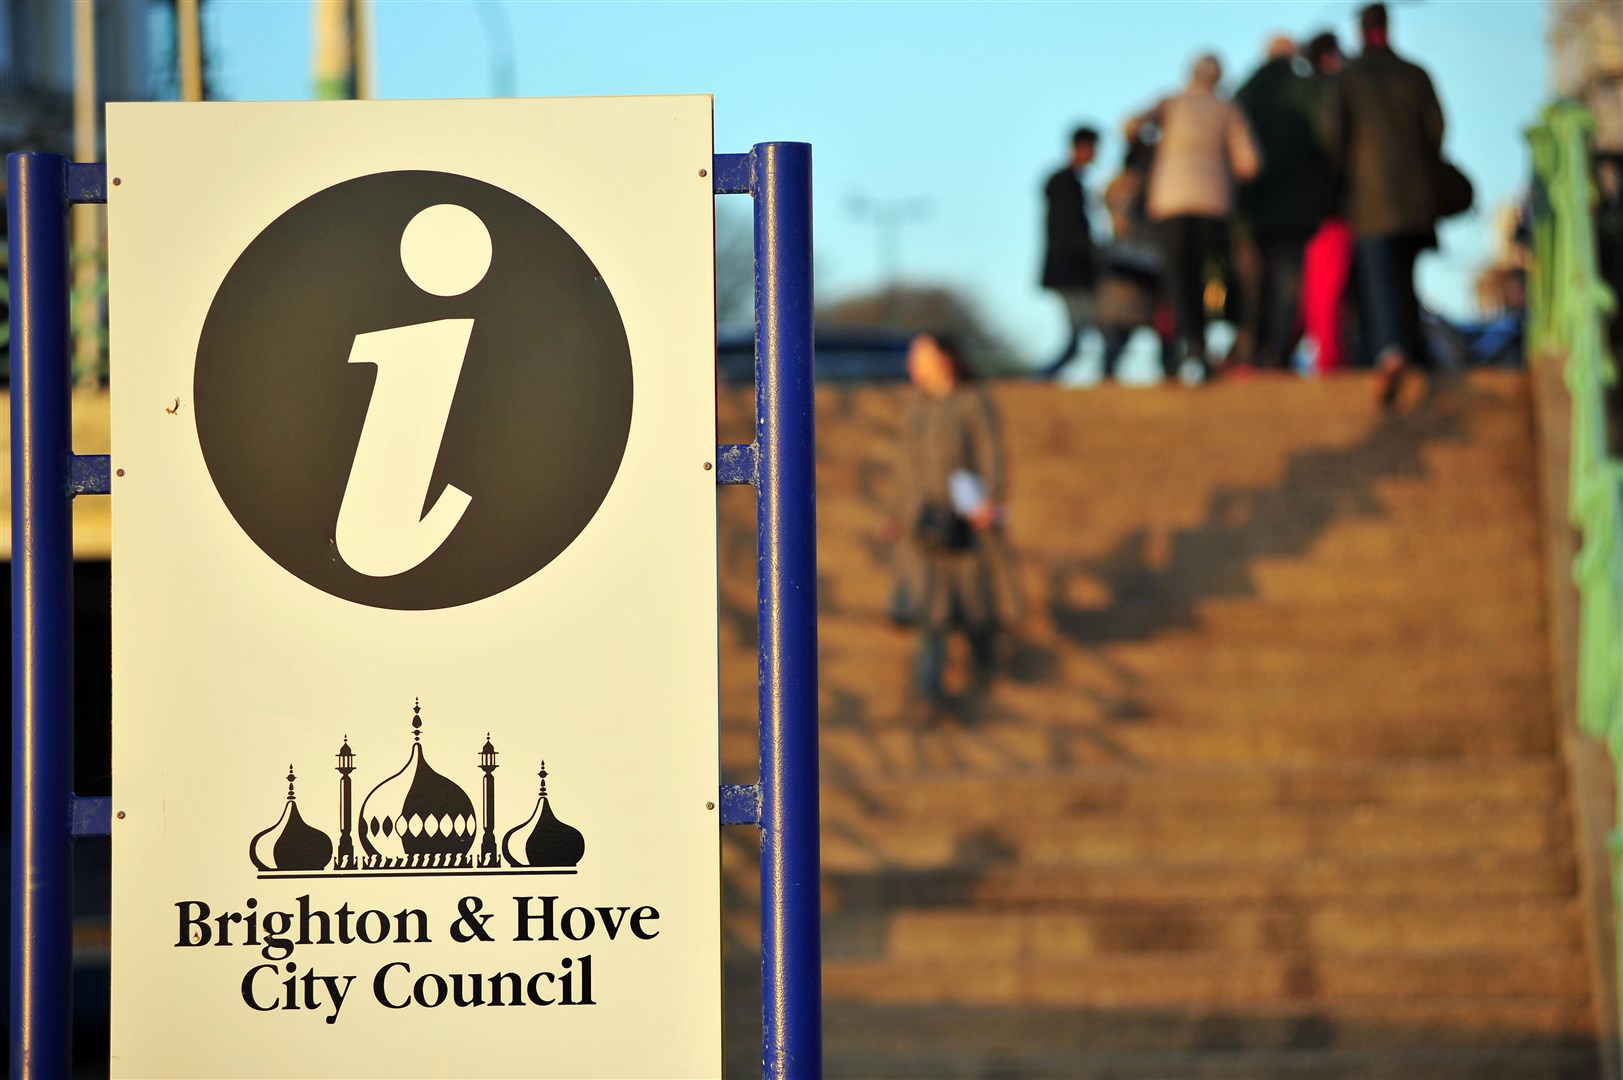 Brighton and Hove City Council’s leader has said the council faces making cuts to services (Alamy/PA)